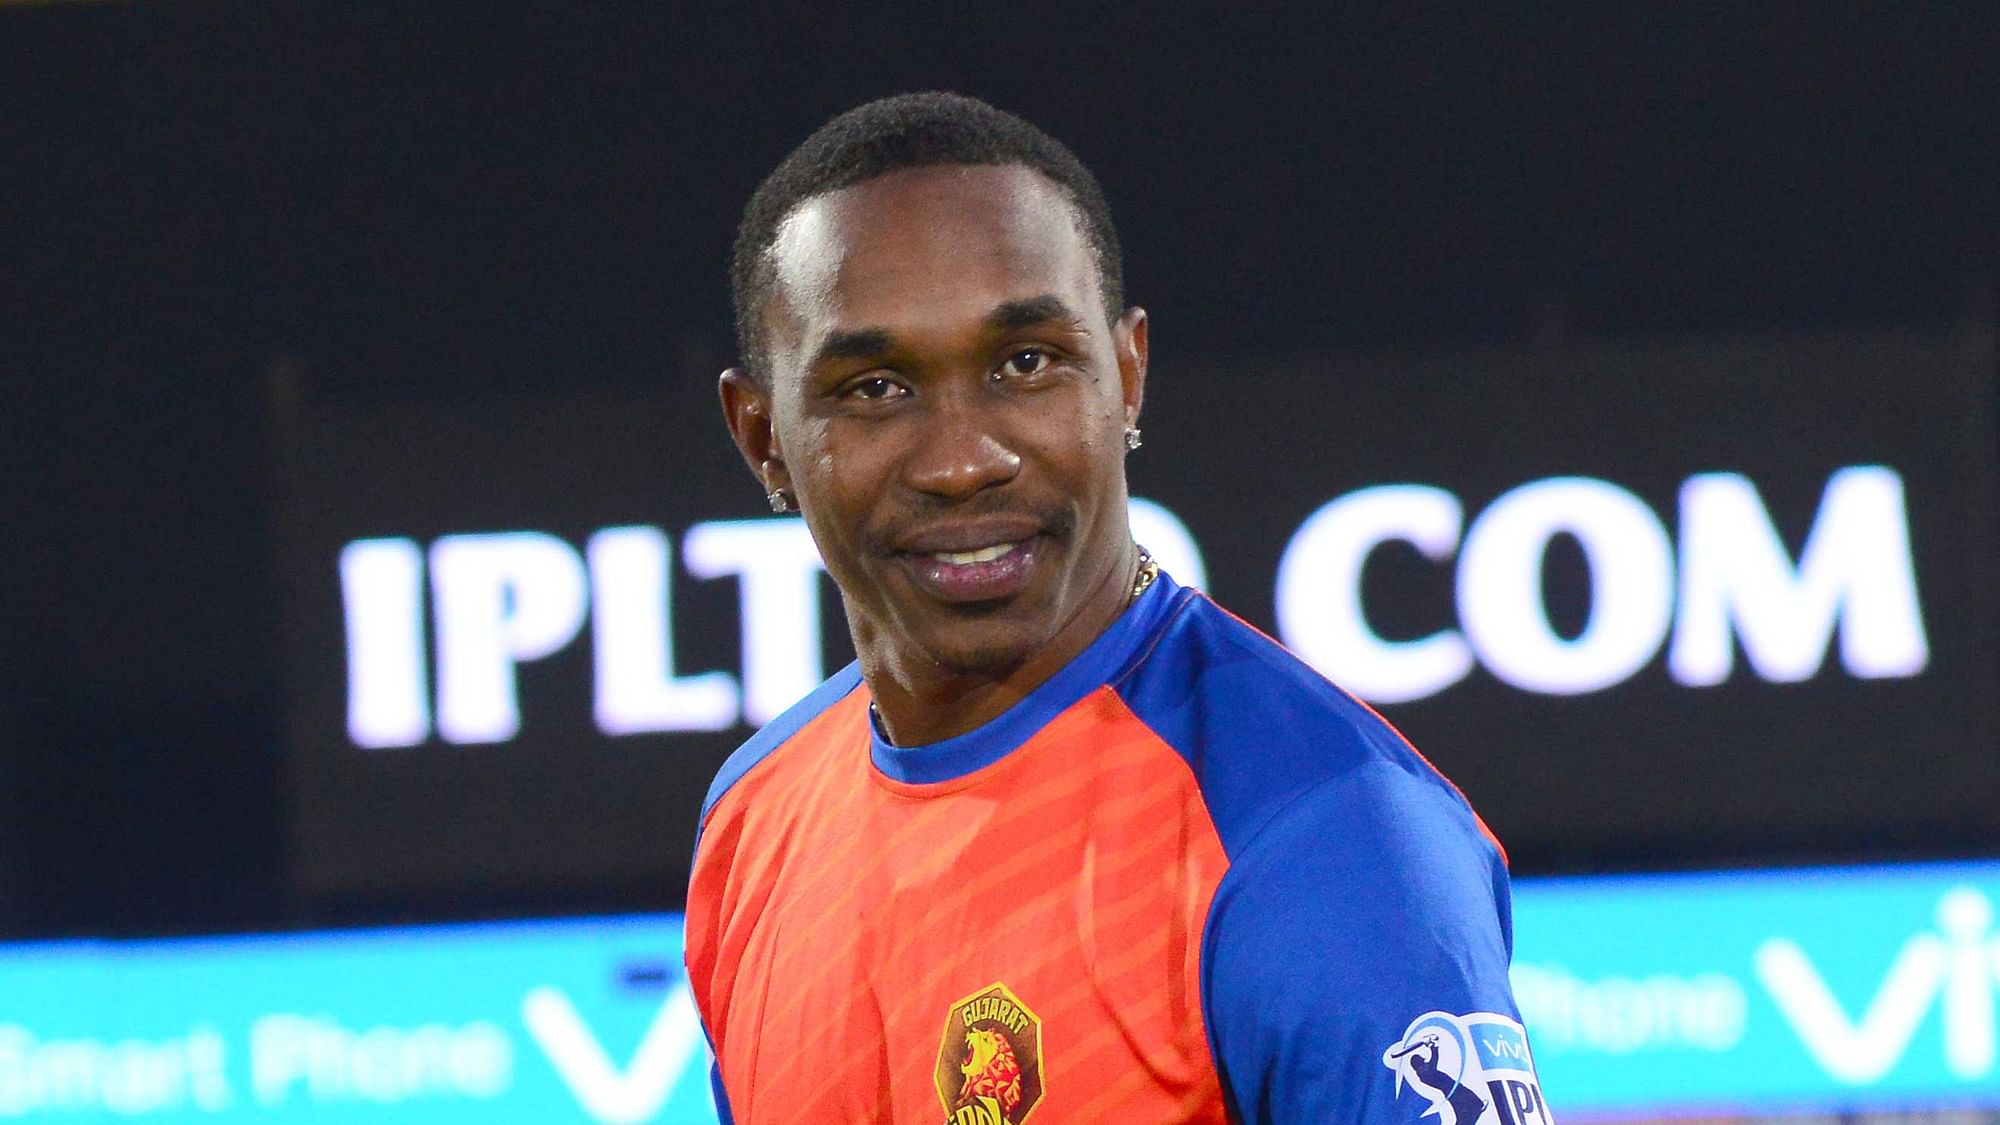 Dwayne Bravo has concluded that there is no franchise better than Chennai Super Kings.